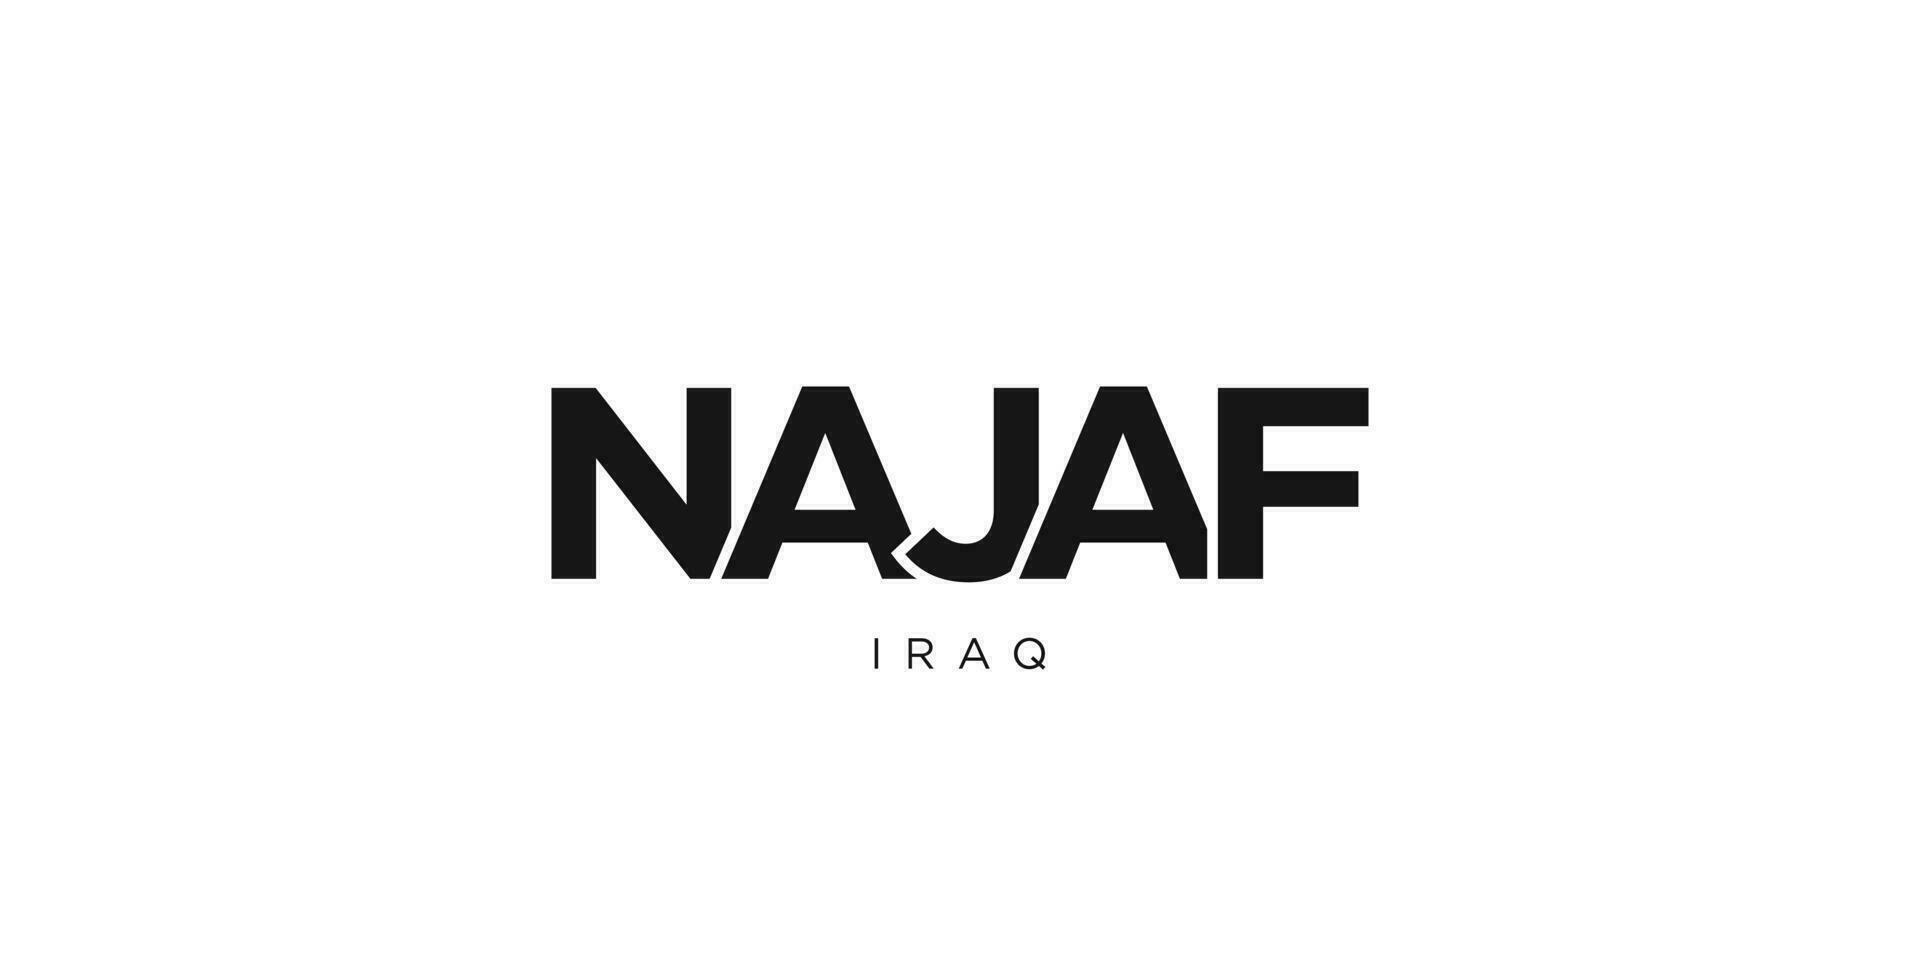 Najaf in the Iraq emblem. The design features a geometric style, vector illustration with bold typography in a modern font. The graphic slogan lettering.